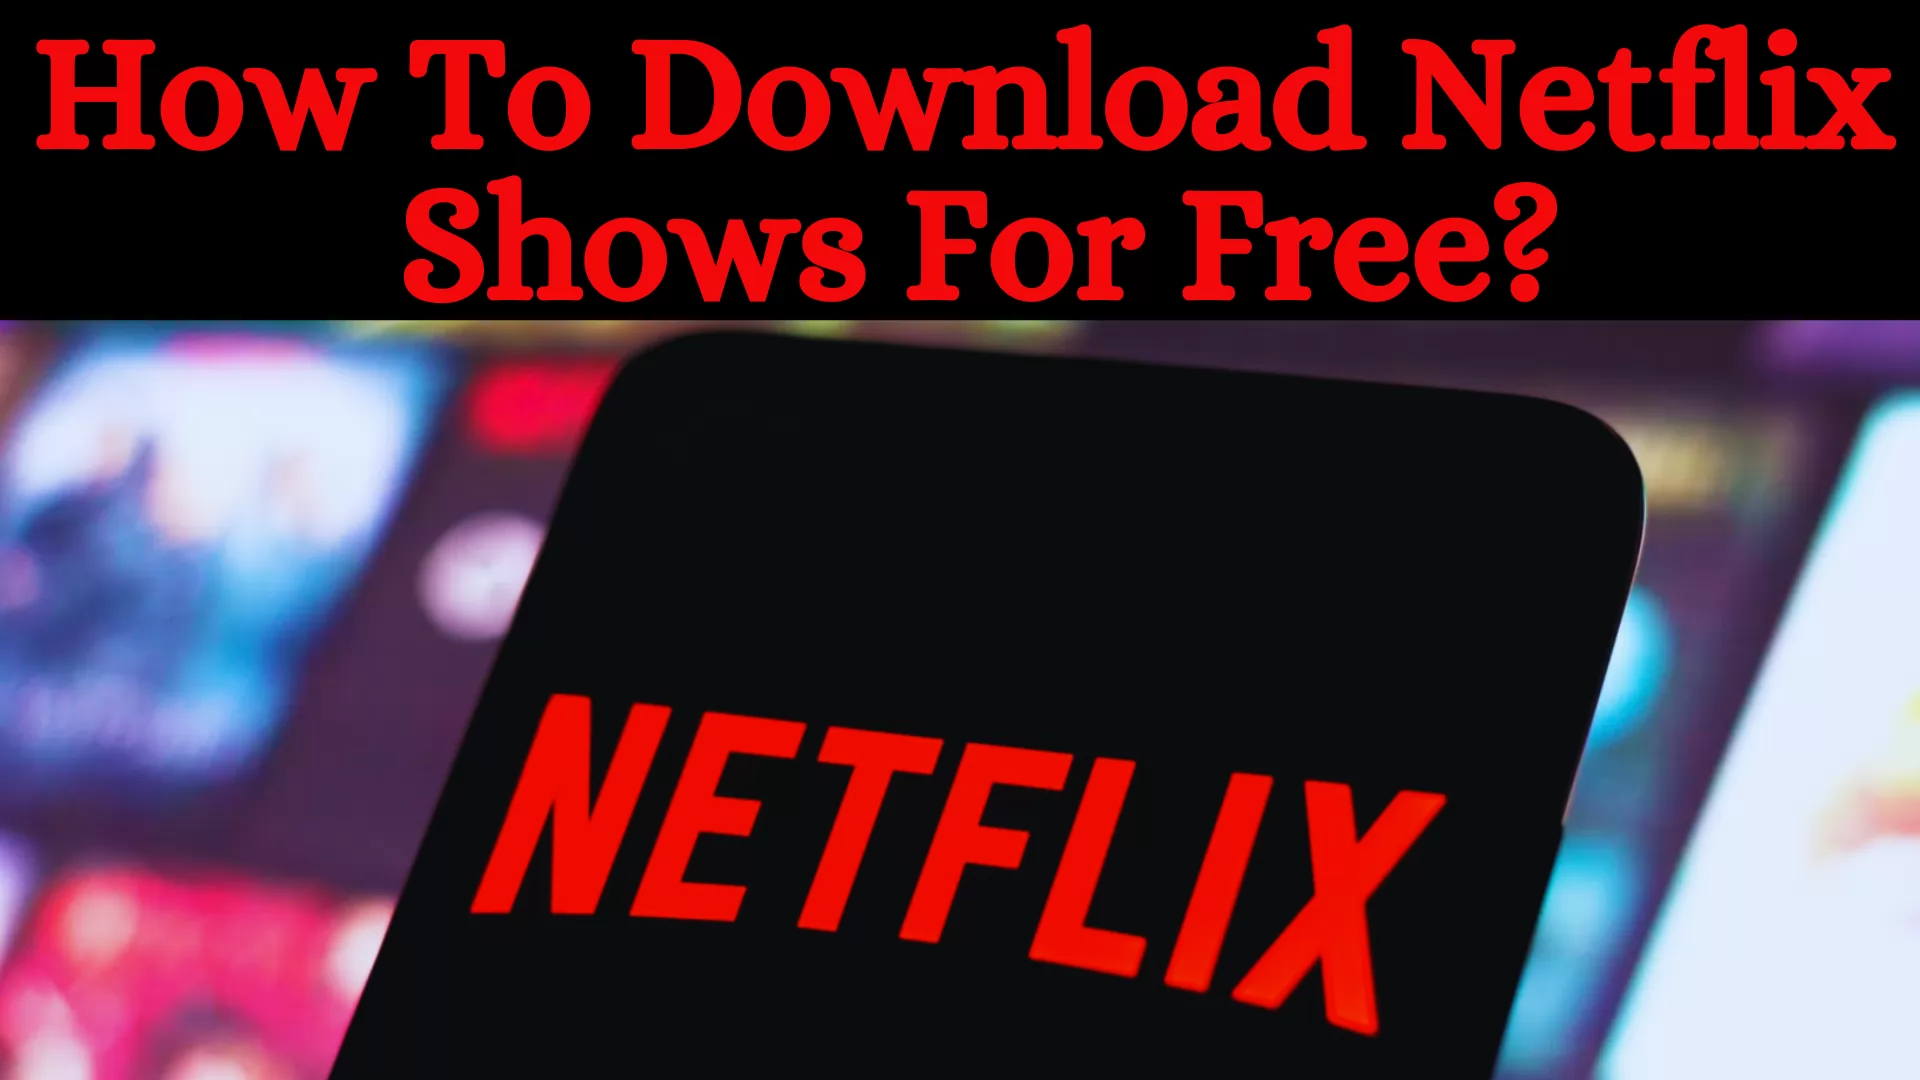 How To Download Netflix Shows For Free?